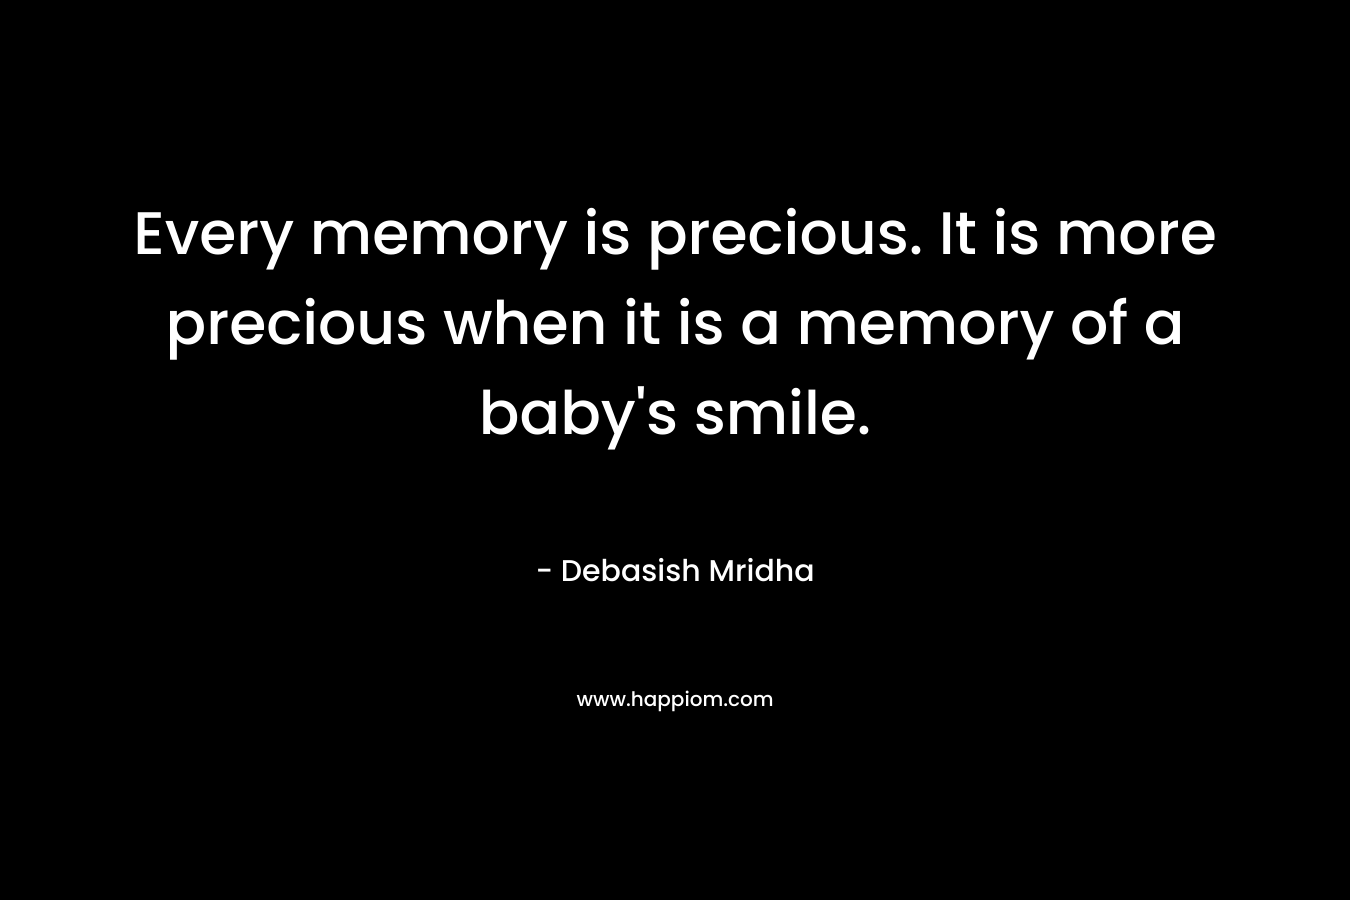 Every memory is precious. It is more precious when it is a memory of a baby’s smile. – Debasish Mridha